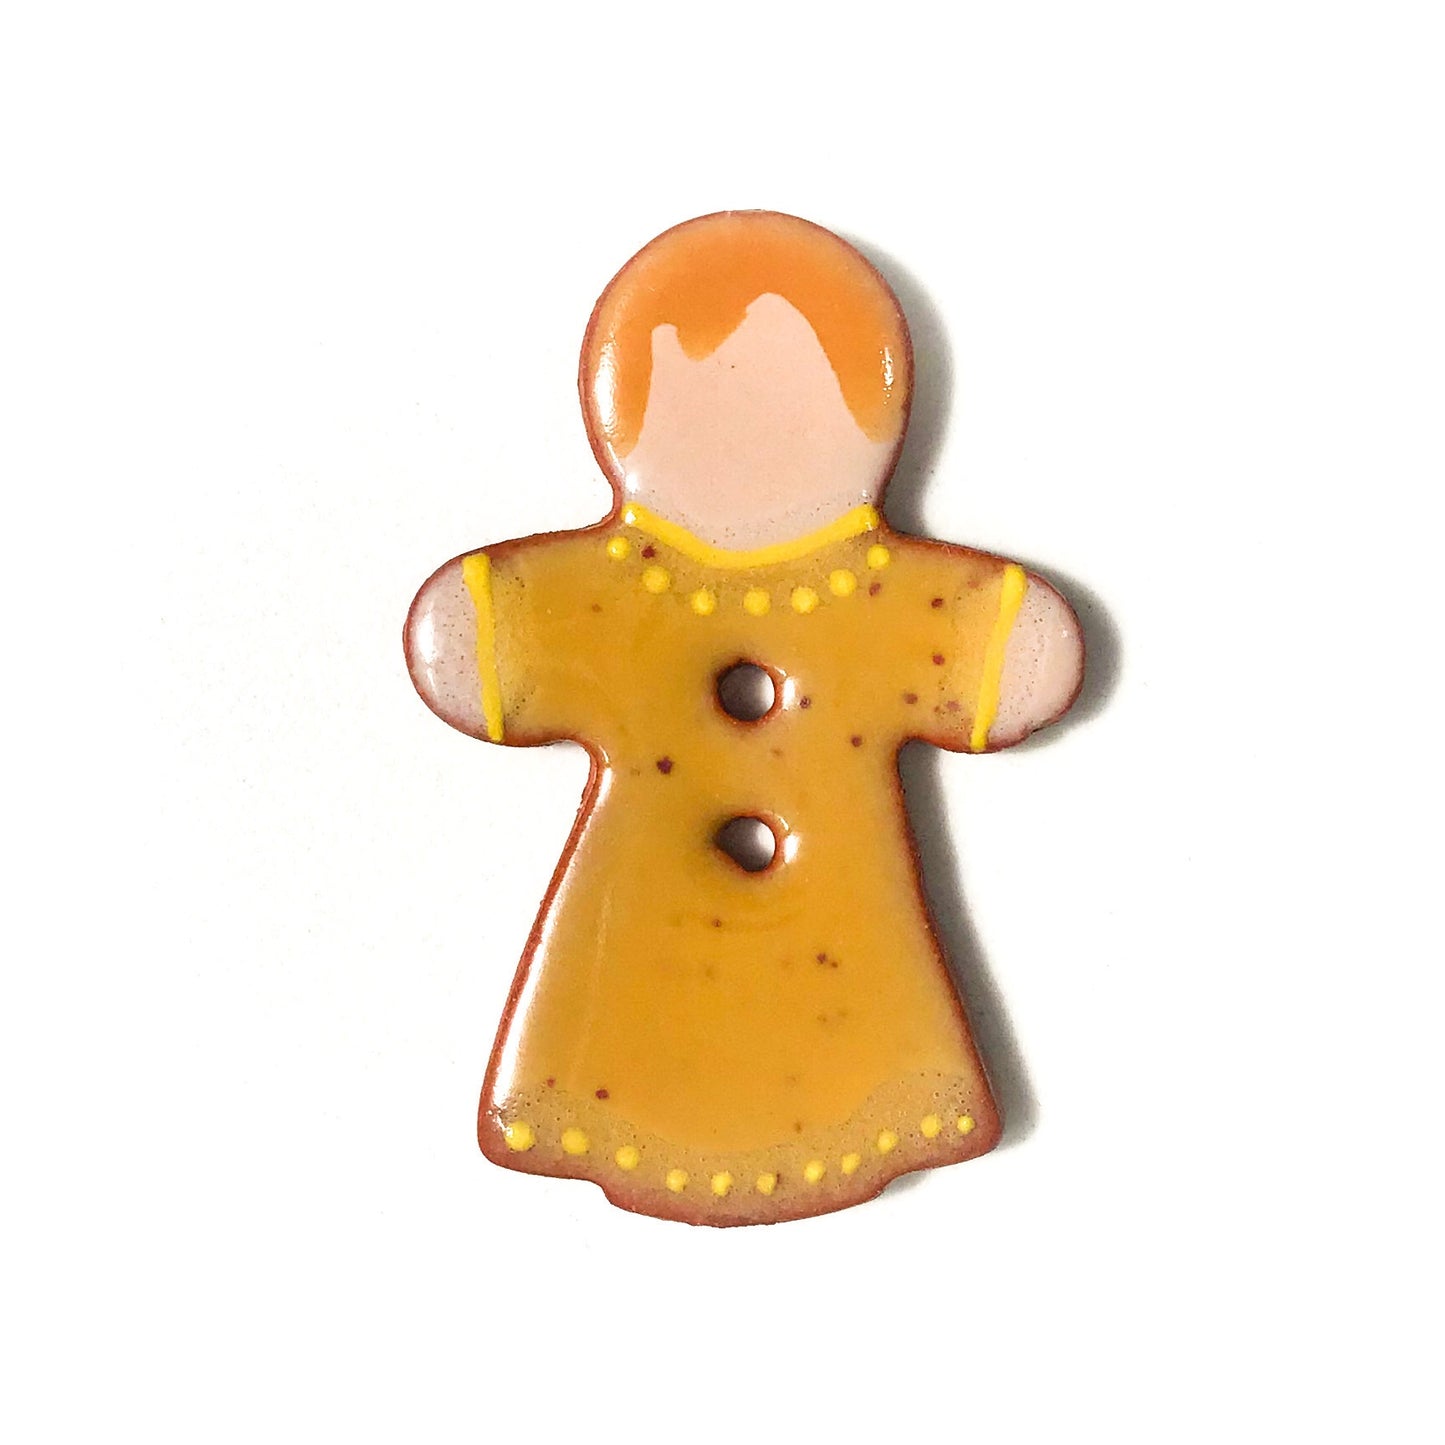 Little Wee Folk Buttons - Waldorf Inspired Ceramic Buttons - 1" x 1 3/8"